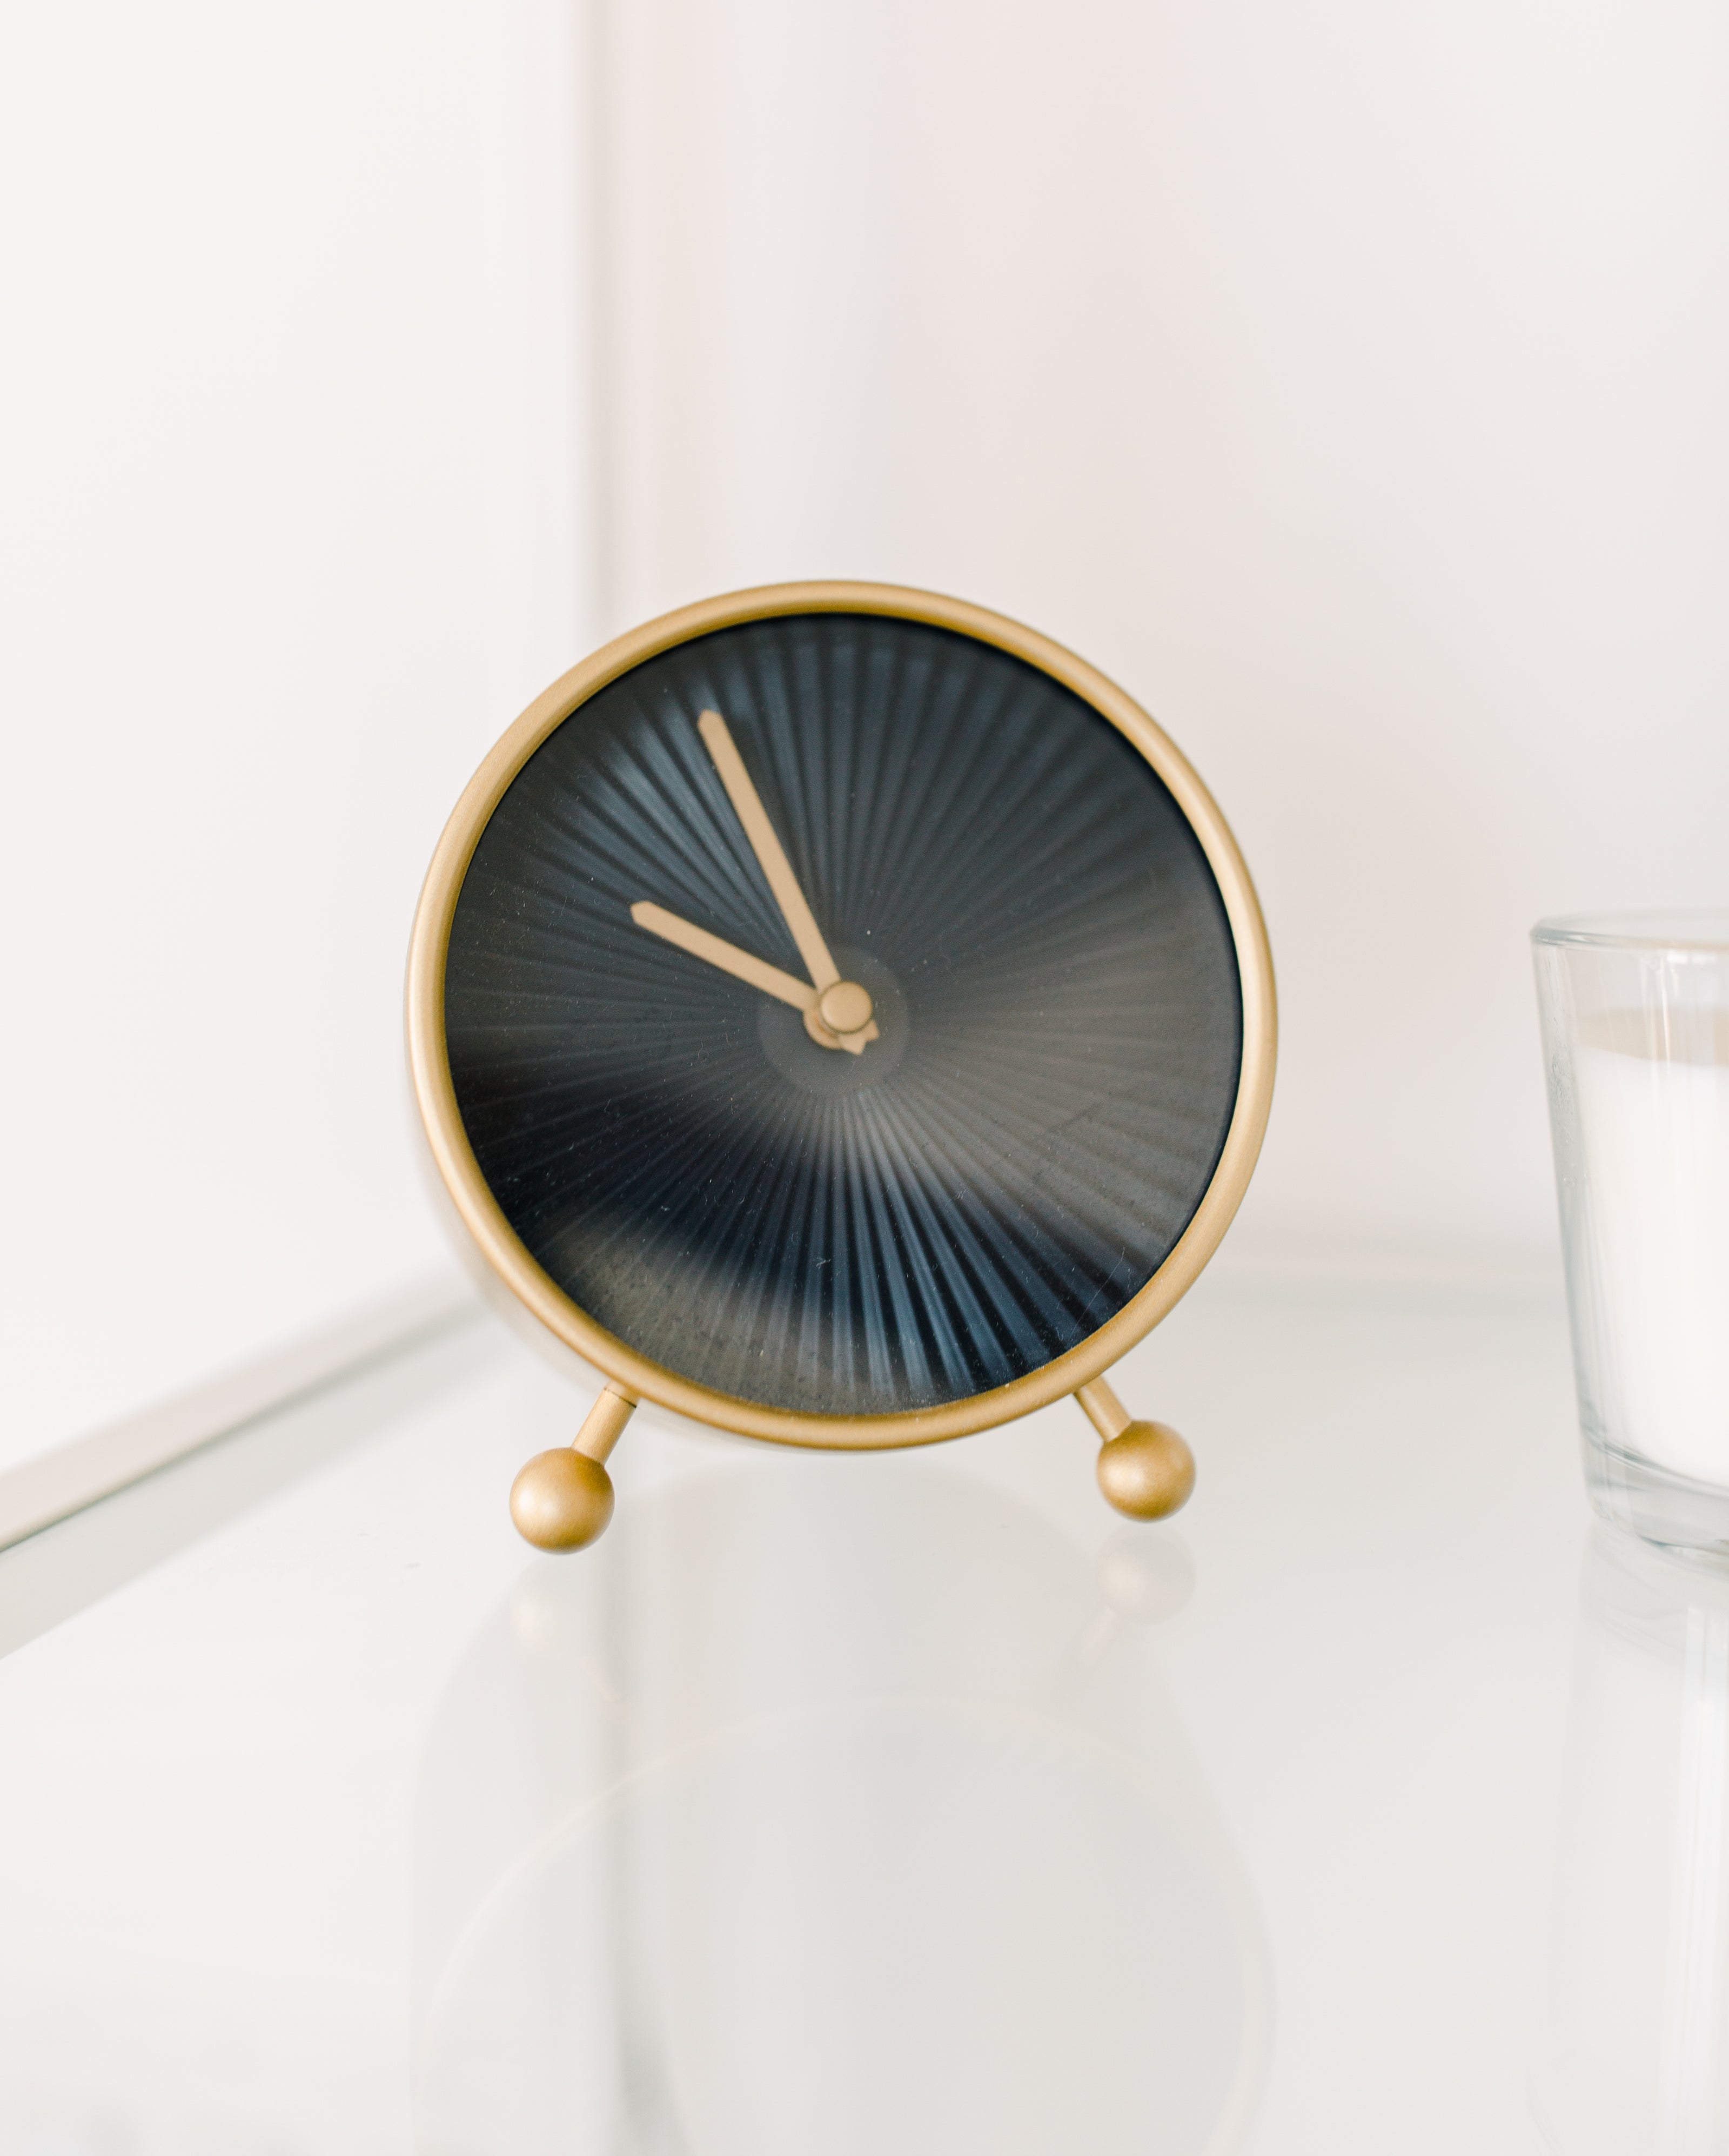 Golden clock in a white room